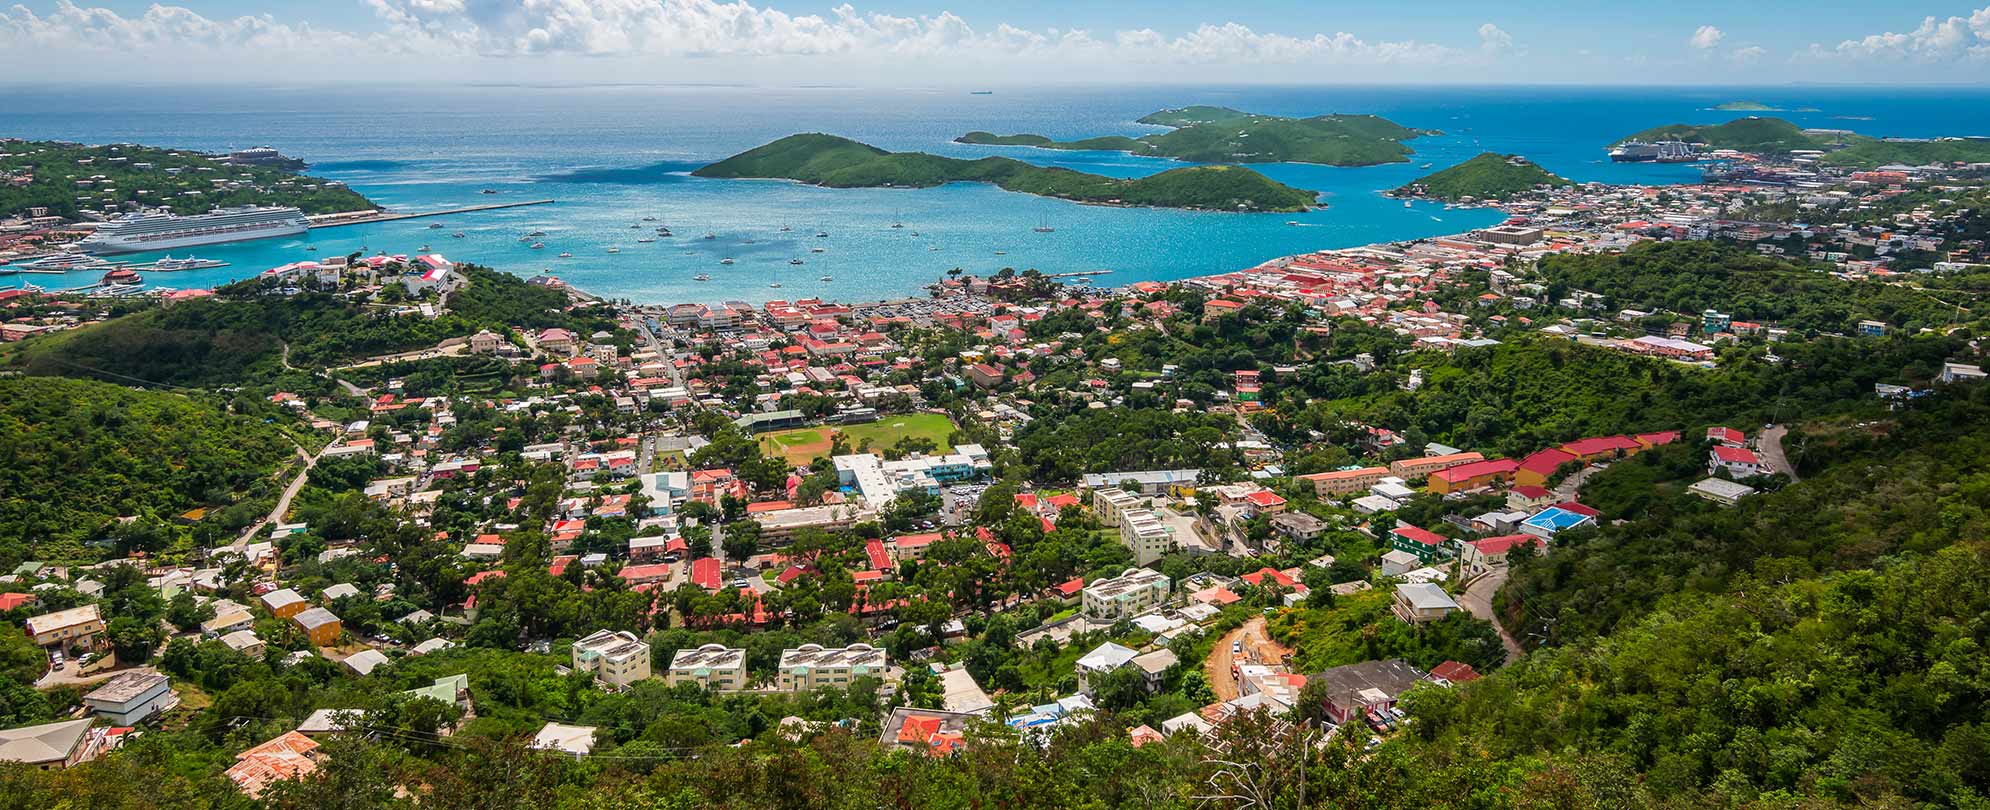 A birds-eye-view of St. Thomas, U.S. Virgin Islands, with red-roofed buildings, blue ocean, and lush green landscape.